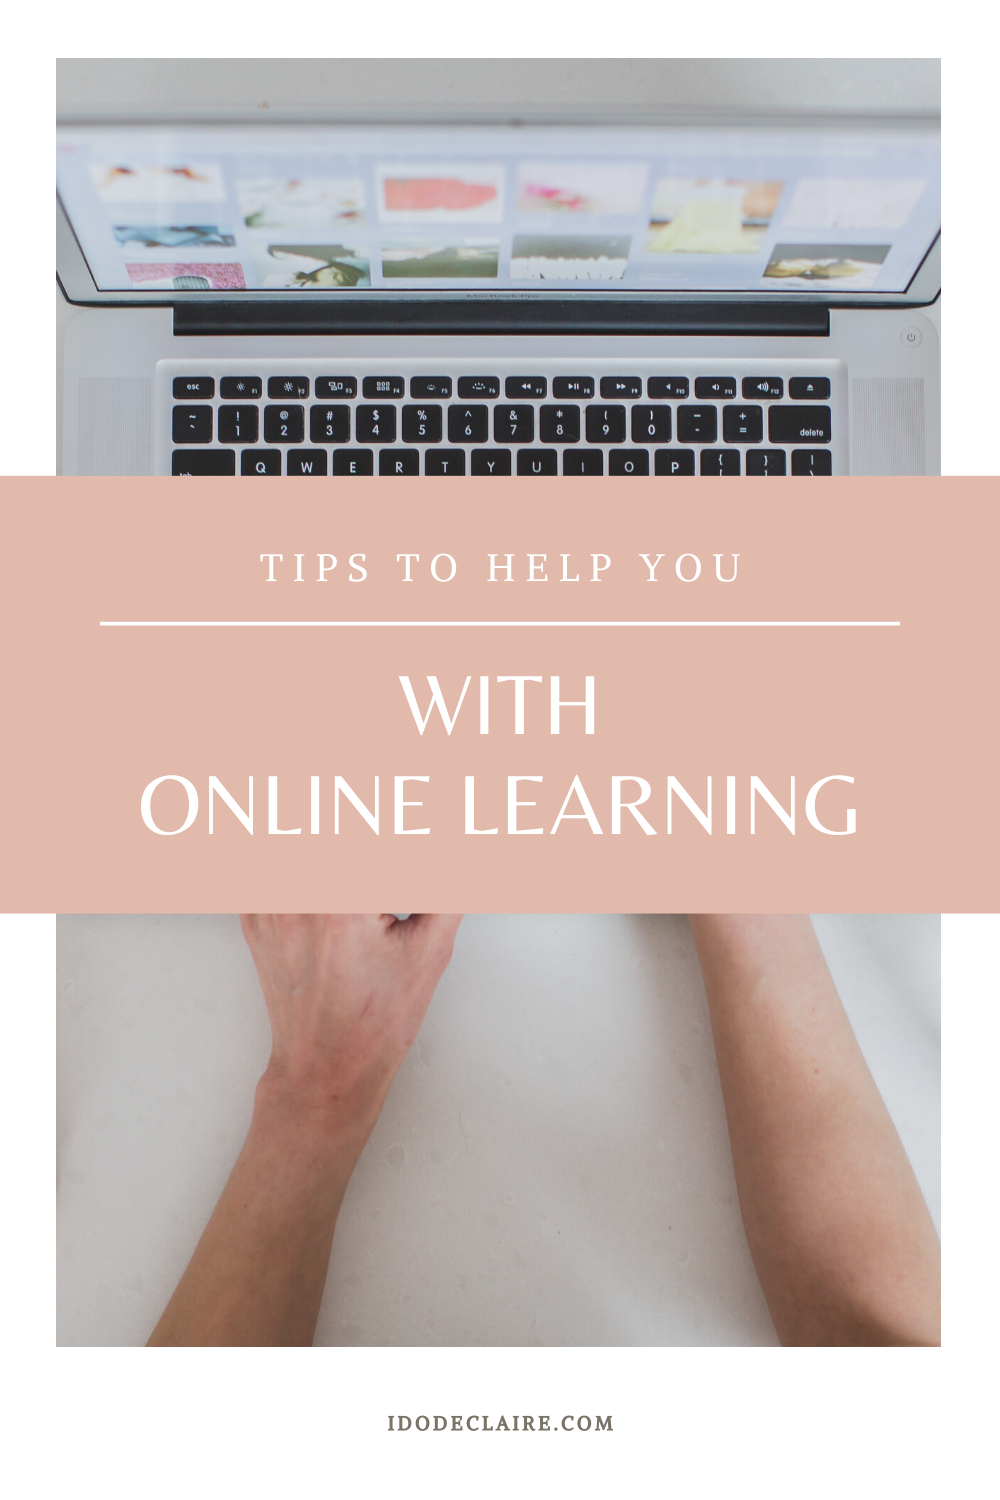 Tips to Help You With Online Learning